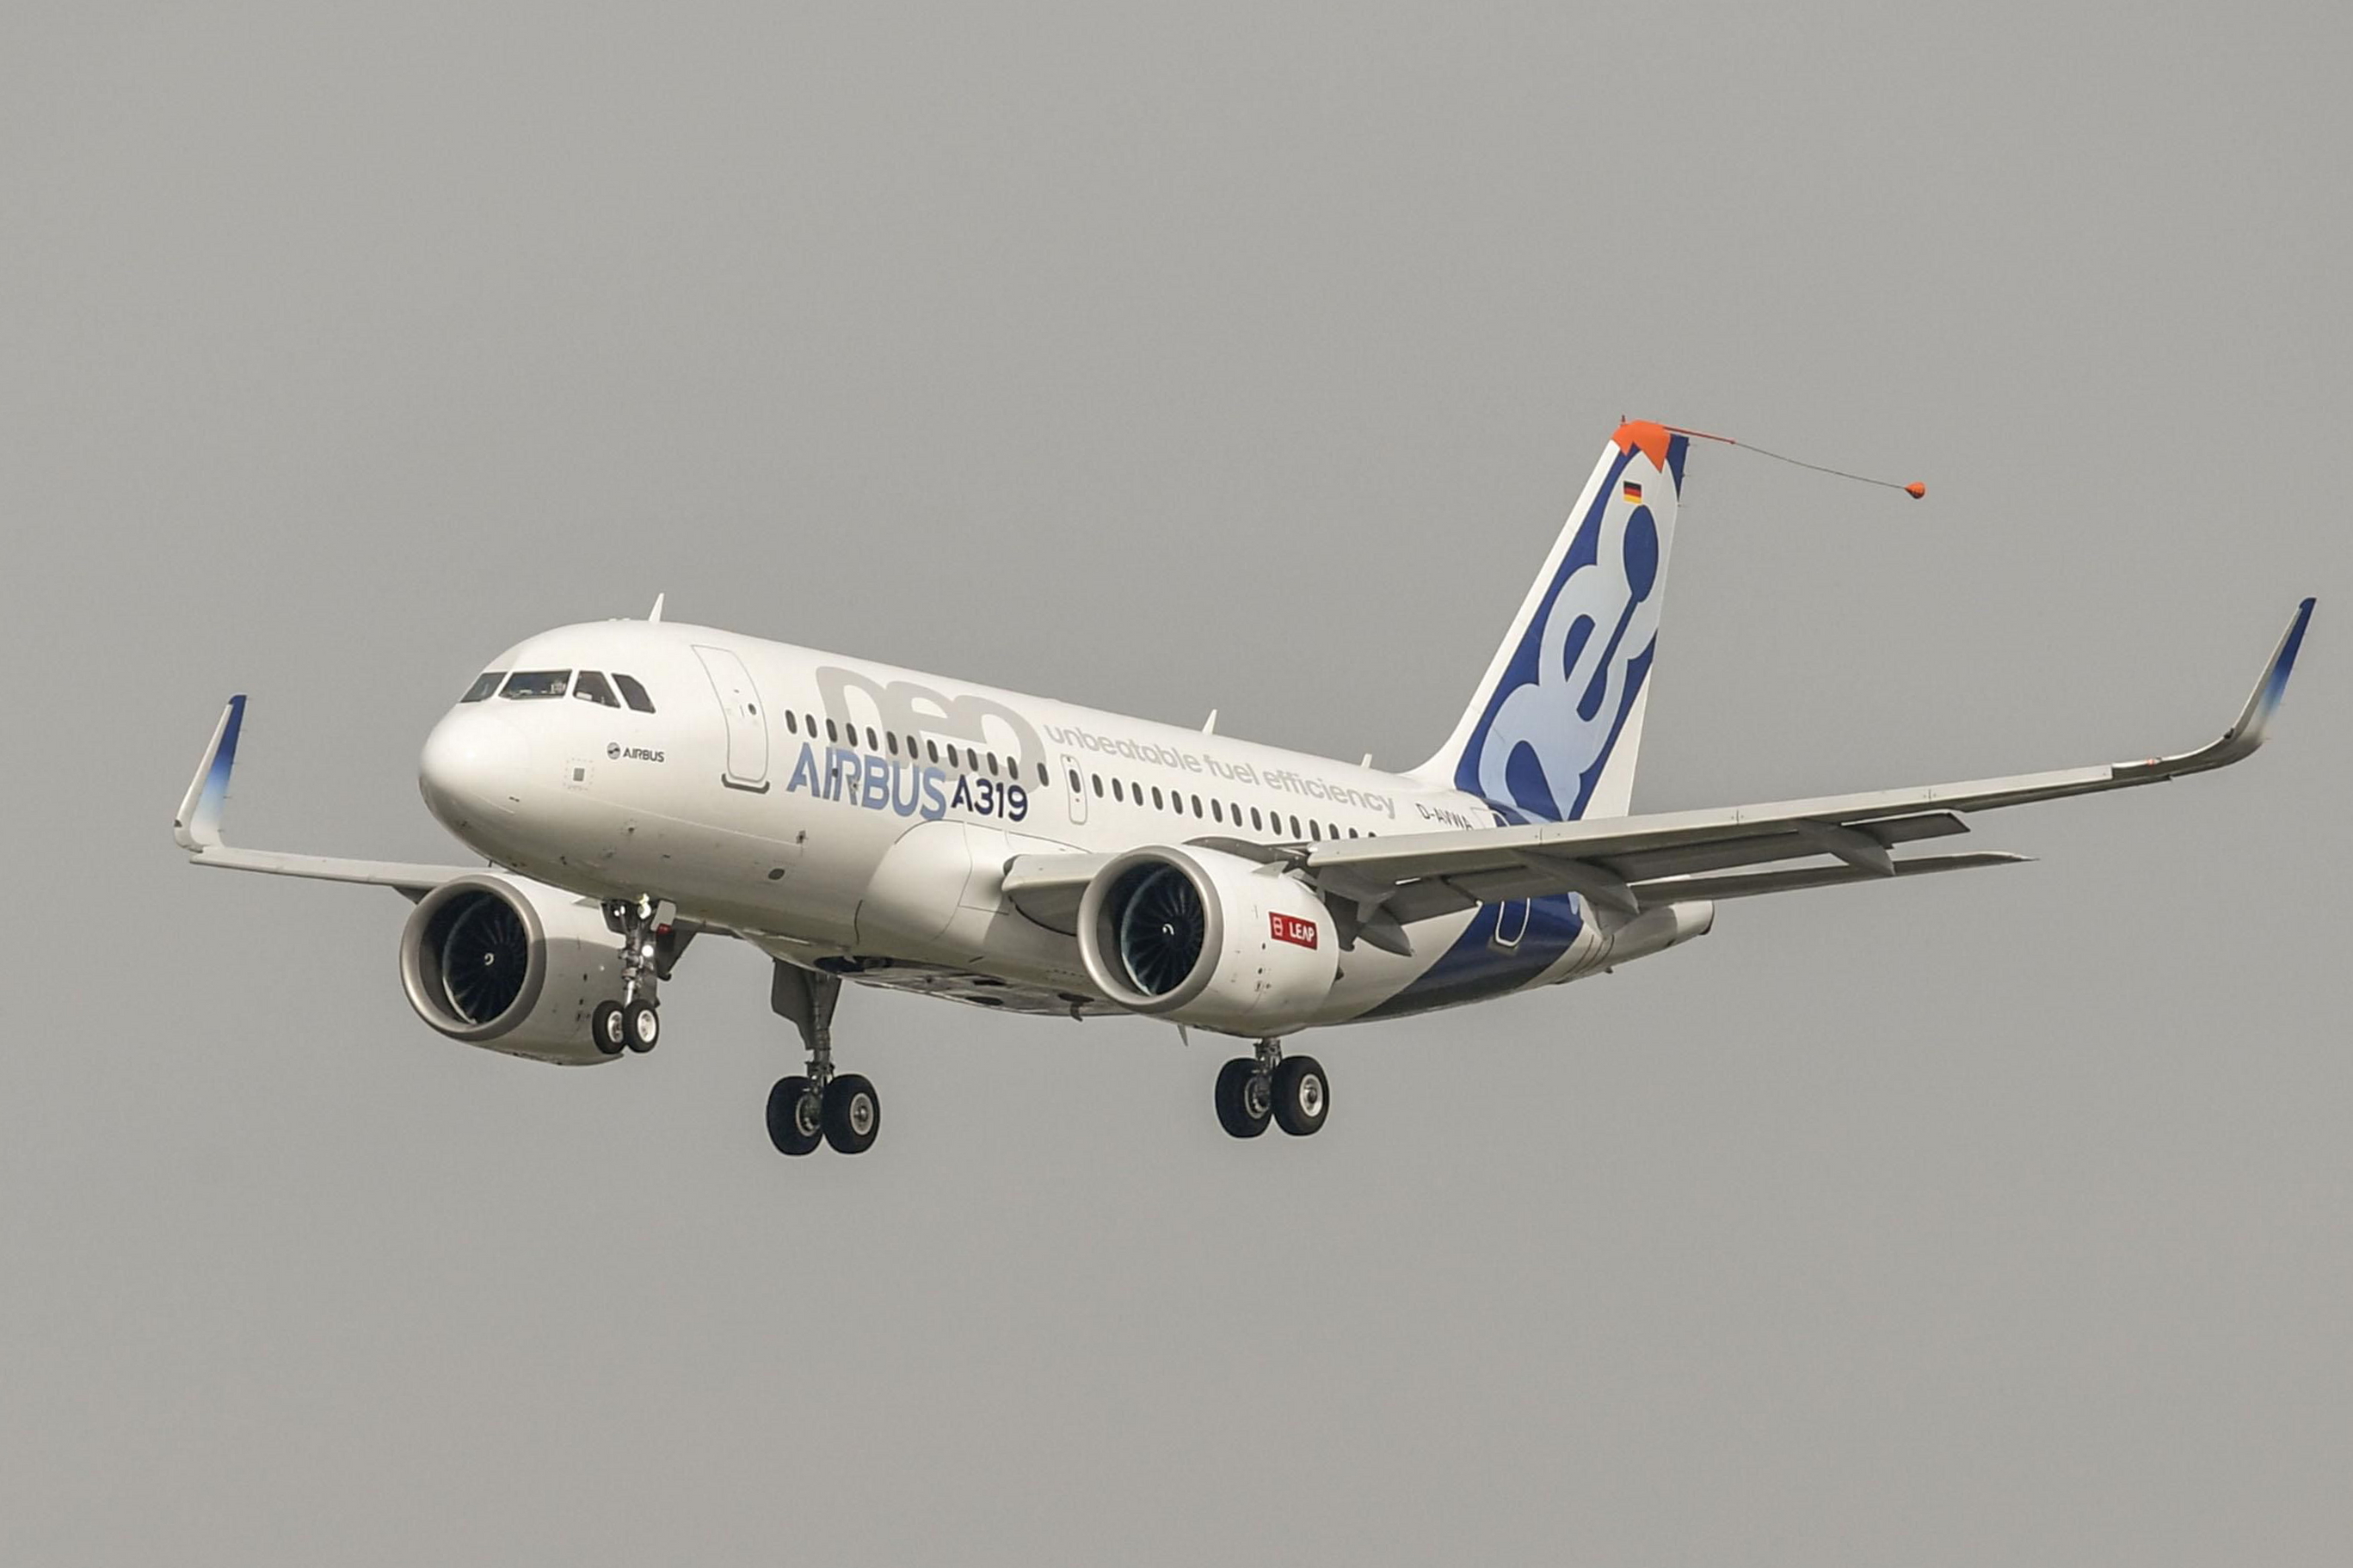 The Airbus A319neo powered by CFM International LEAP-1A engines has achieved joint Type Certification from both the US FAA and European EASA airworthiness authorities. All three aircraft models – the A319neo, A320neo and A321neo – are now certified by the international authorities to operate with the CFM LEAP-1A engine option. Click to enlarge.